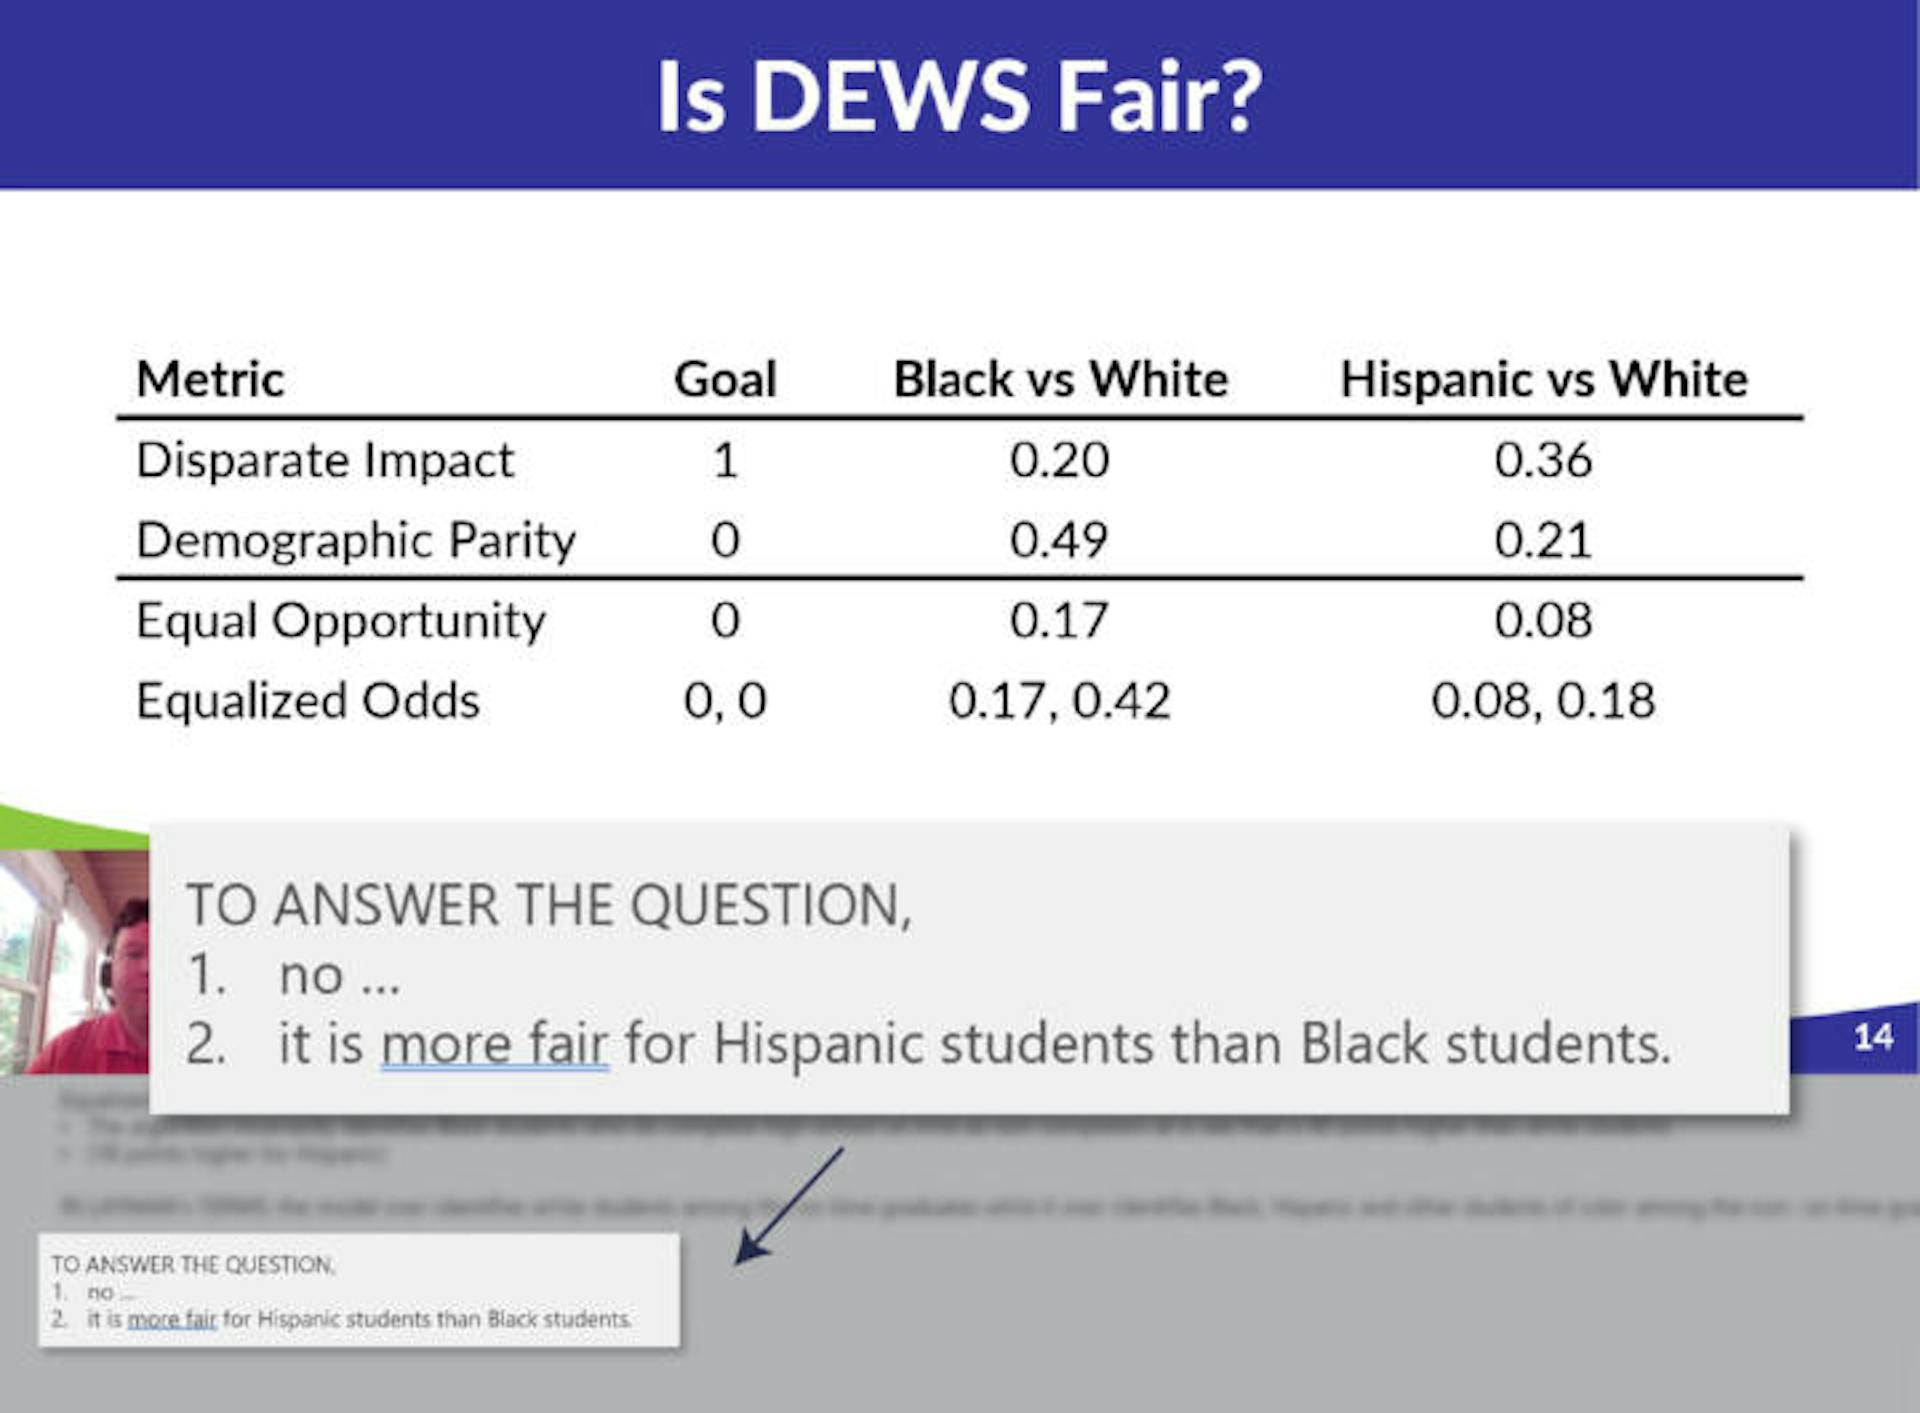 Screenshot of a slide from a DPI presentation. The headline is “Is DEWS Fair?” and presentation notes are highlighted below it. The notes say “TO ANSWER THE QUESTION, no…”